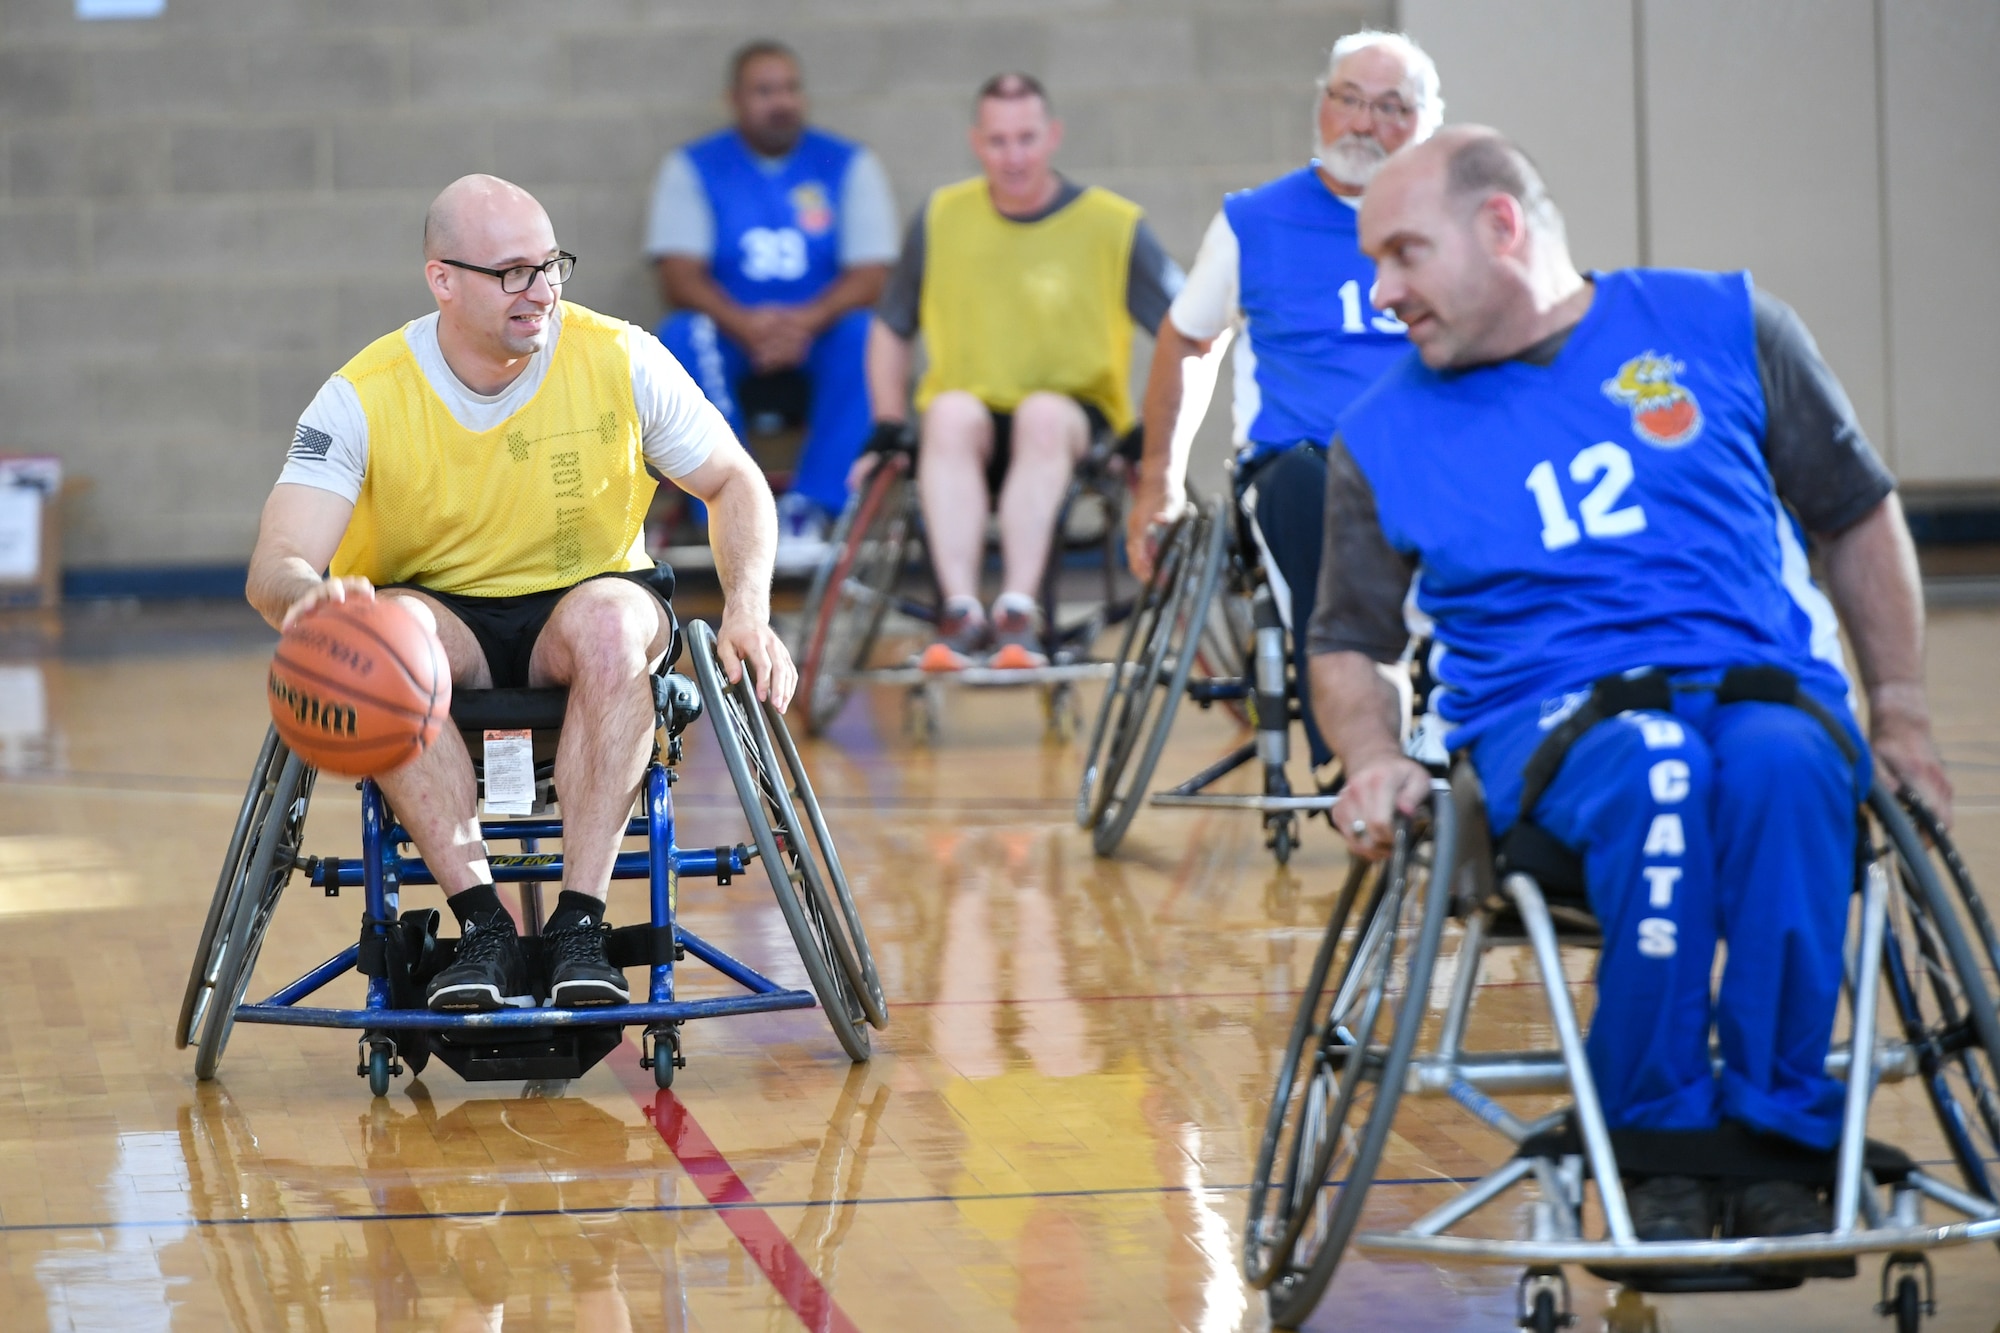 Master Sgt. Albert Lamboy, 75th Logistics Readiness Squadron acting first sergeant, dribbles the ball during a wheelchair basketball game Oct. 9, 2019 at Hill Air Force Base, Utah. Leaders from Hill's units faced off against the Ogden Wheelin' Wildcats, a semi-professional wheelchair basketball team, to celebrate National Disability Employment Awareness Month. (U.S. Air Force photo by Cynthia Griggs)